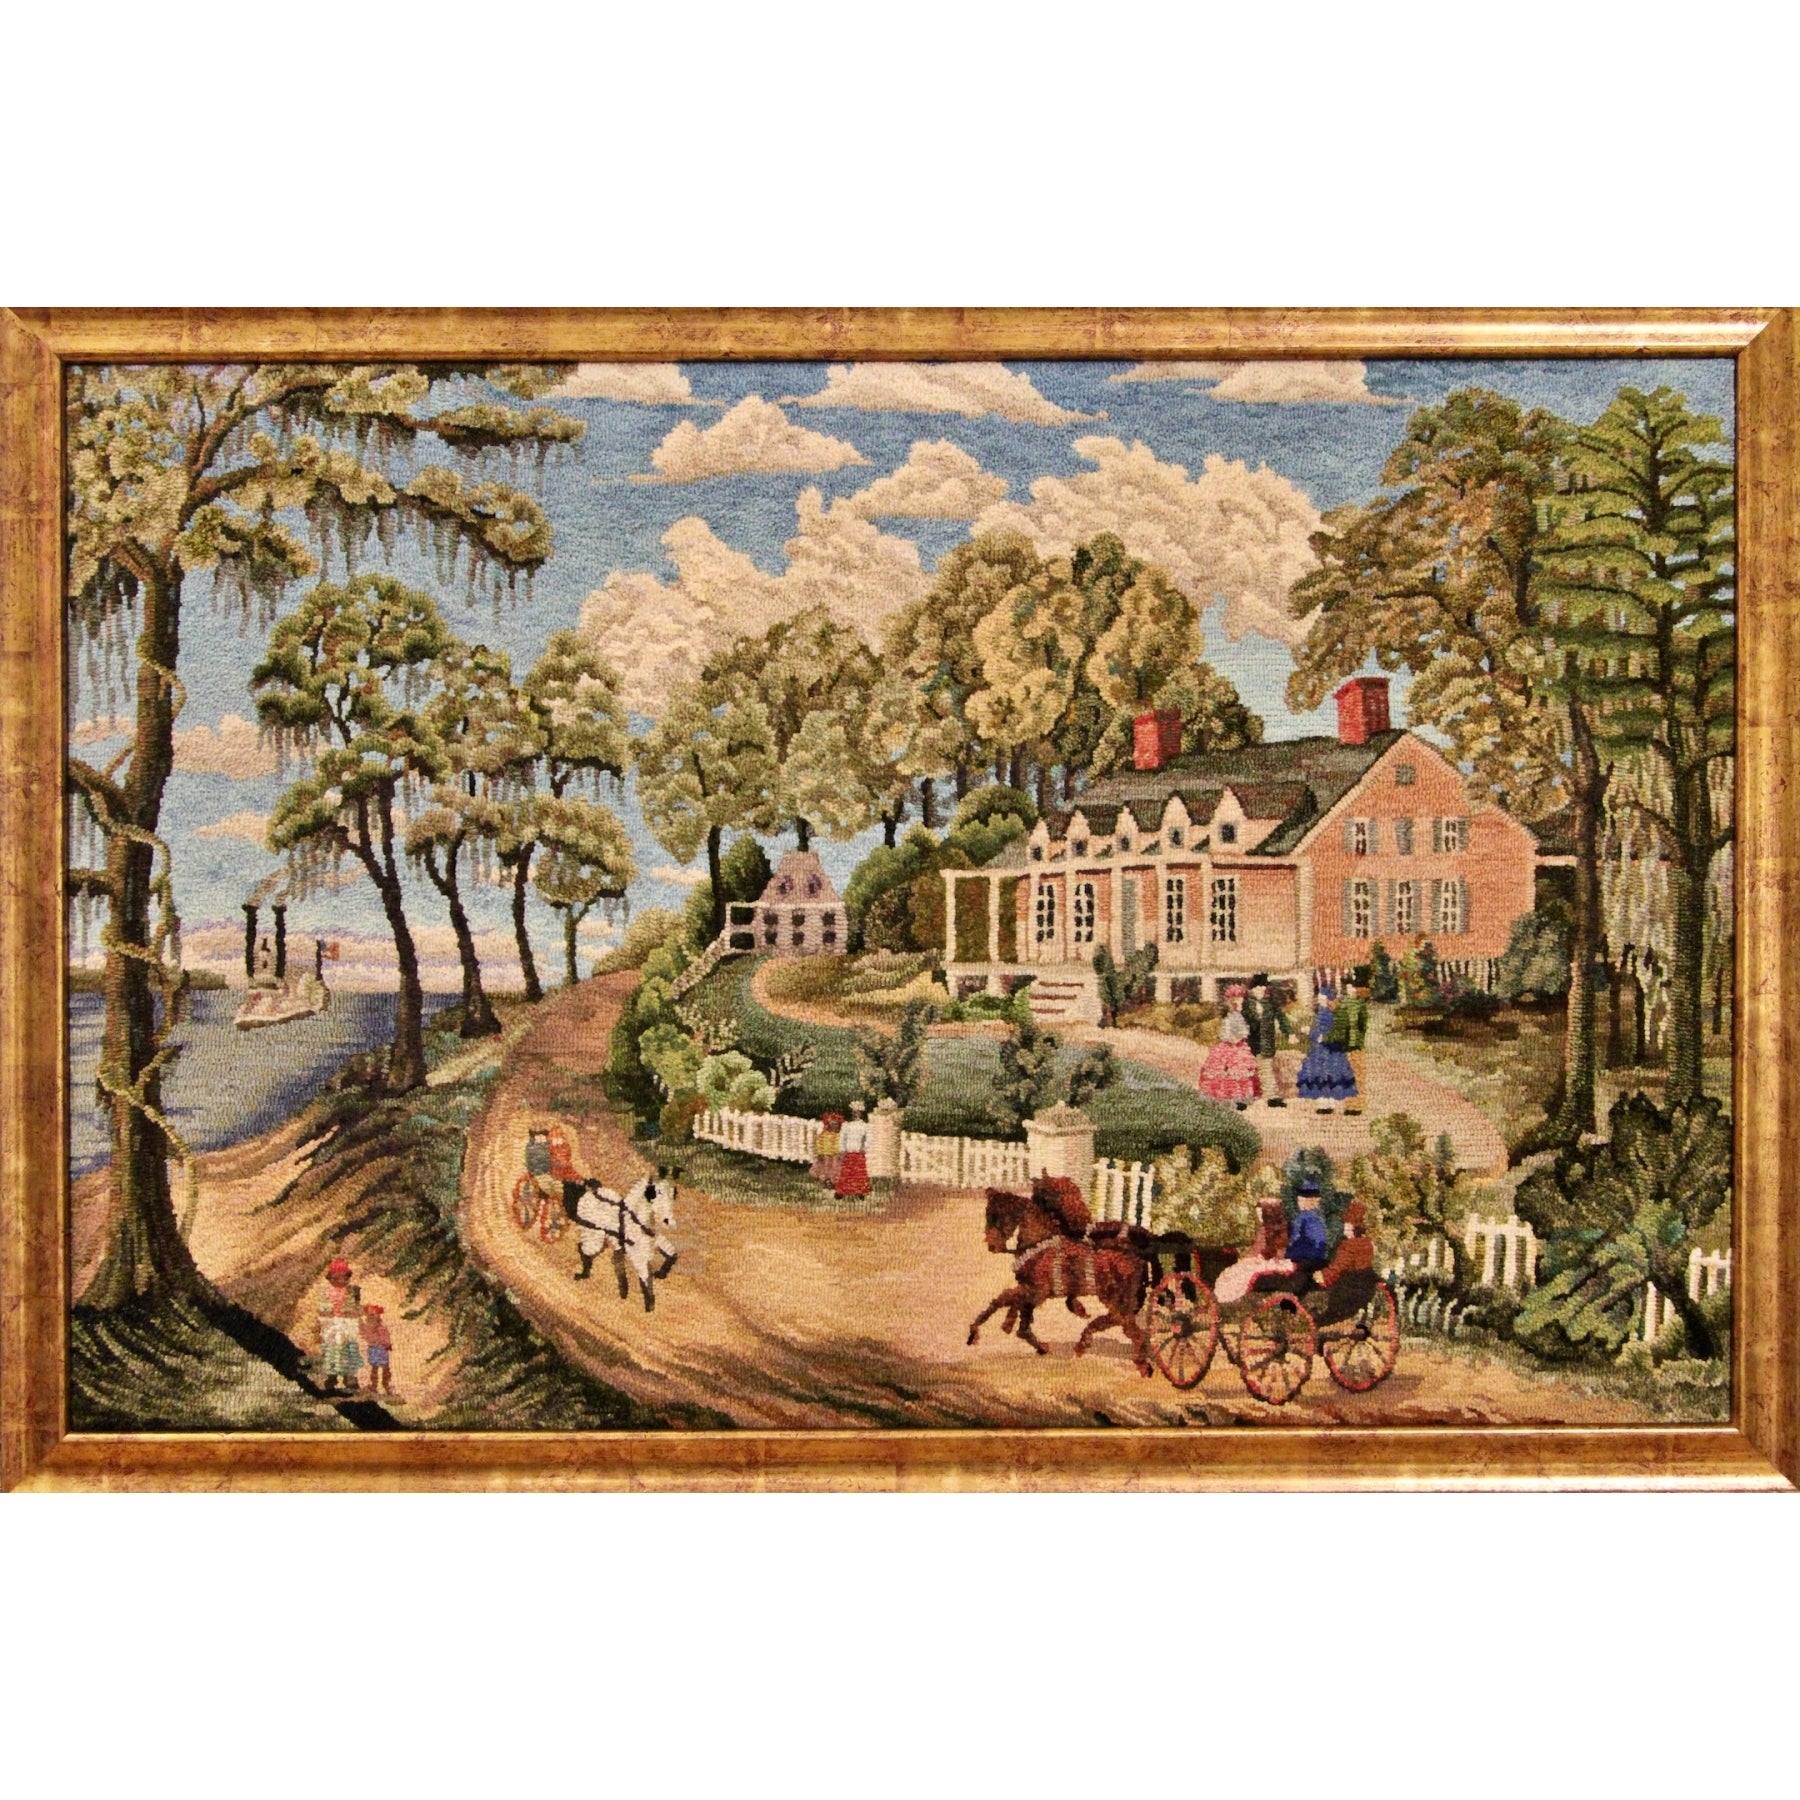 Home on the Mississippi, rug hooked by Jane McGown Flynn